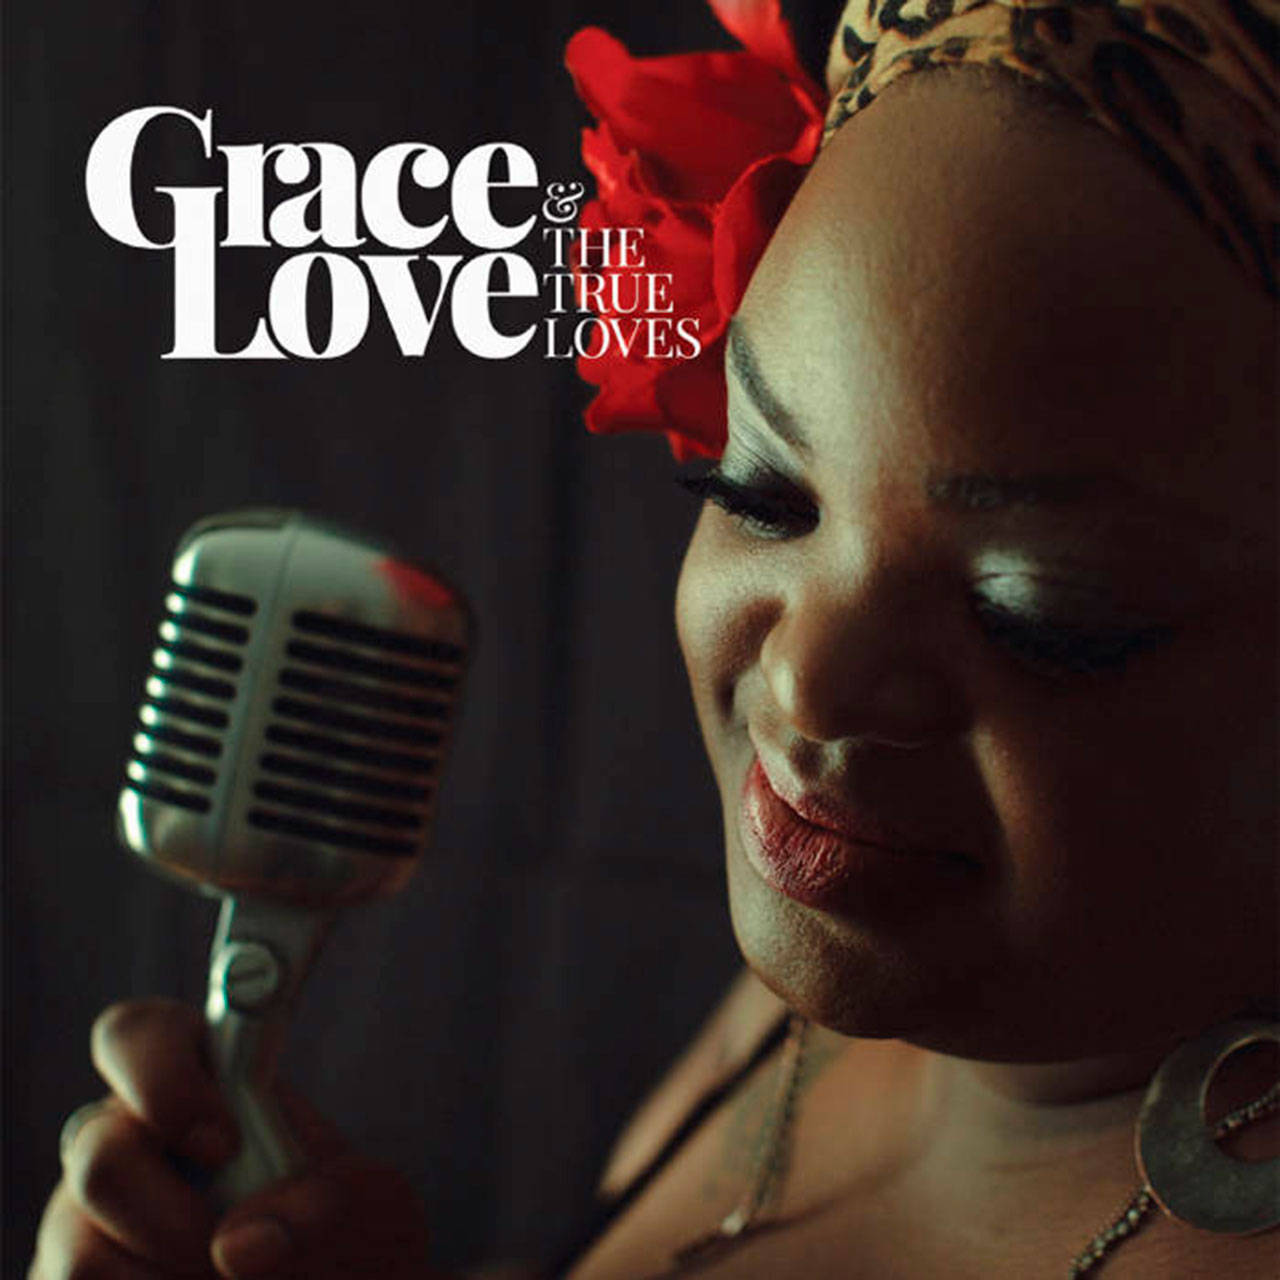 Image courtesy of Grace Love & the True Loves | The self-titled debut album by Seattle’s Grace Love & the True Loves.